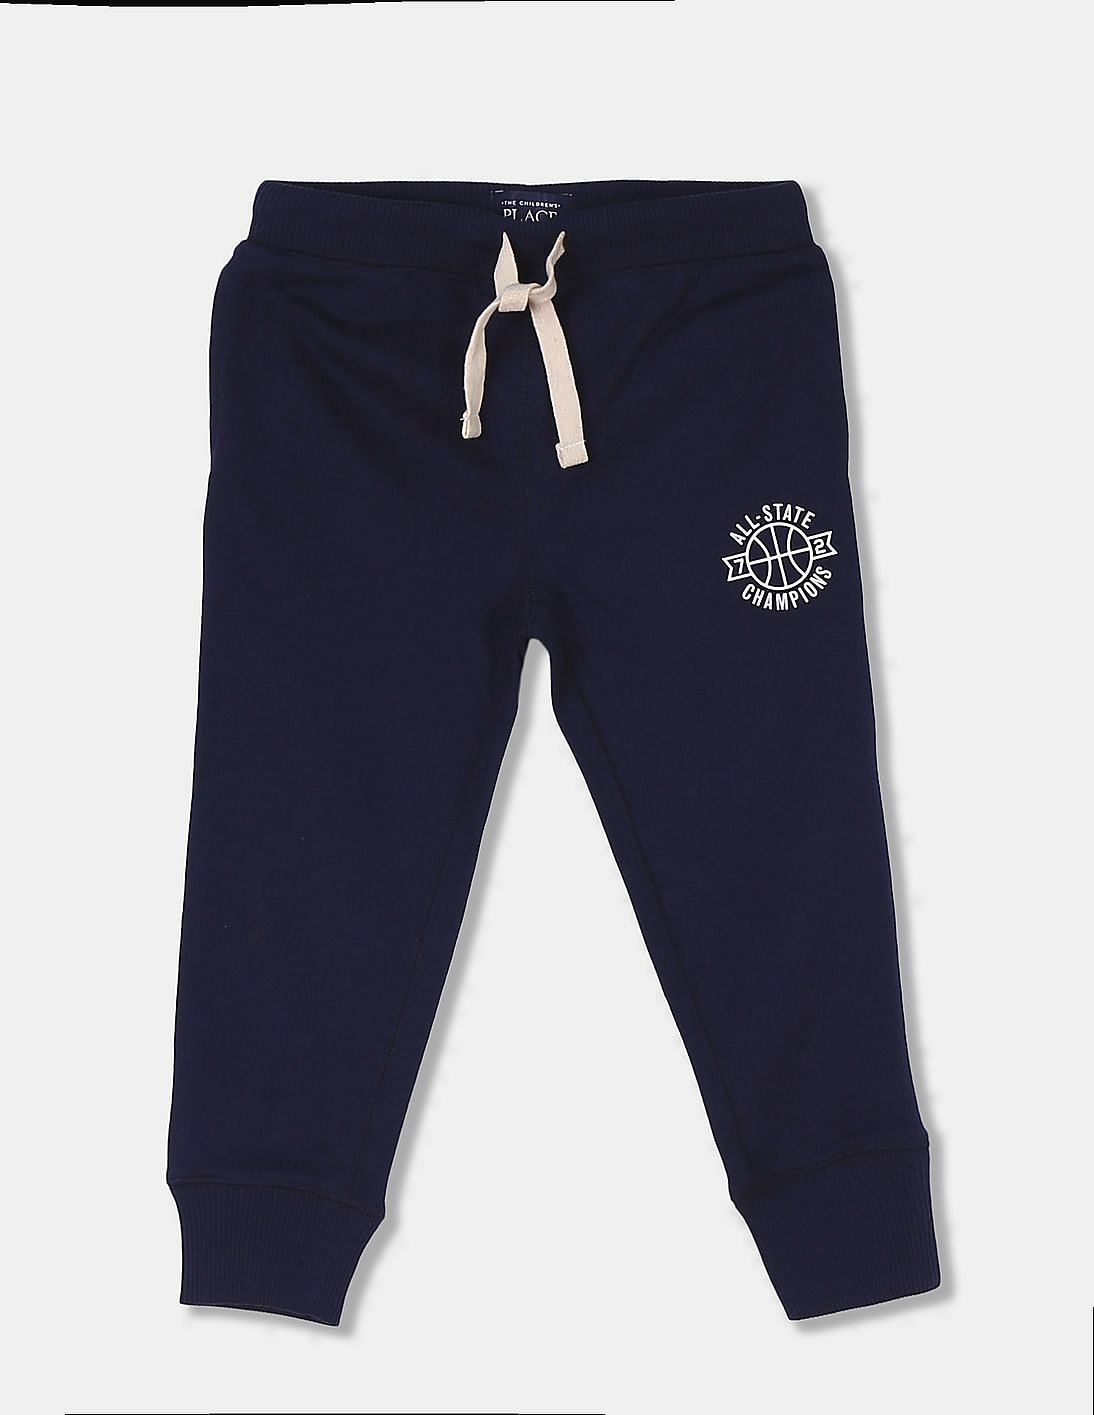 Buy The Children's Place Boys Navy Solid Knit Joggers - NNNOW.com